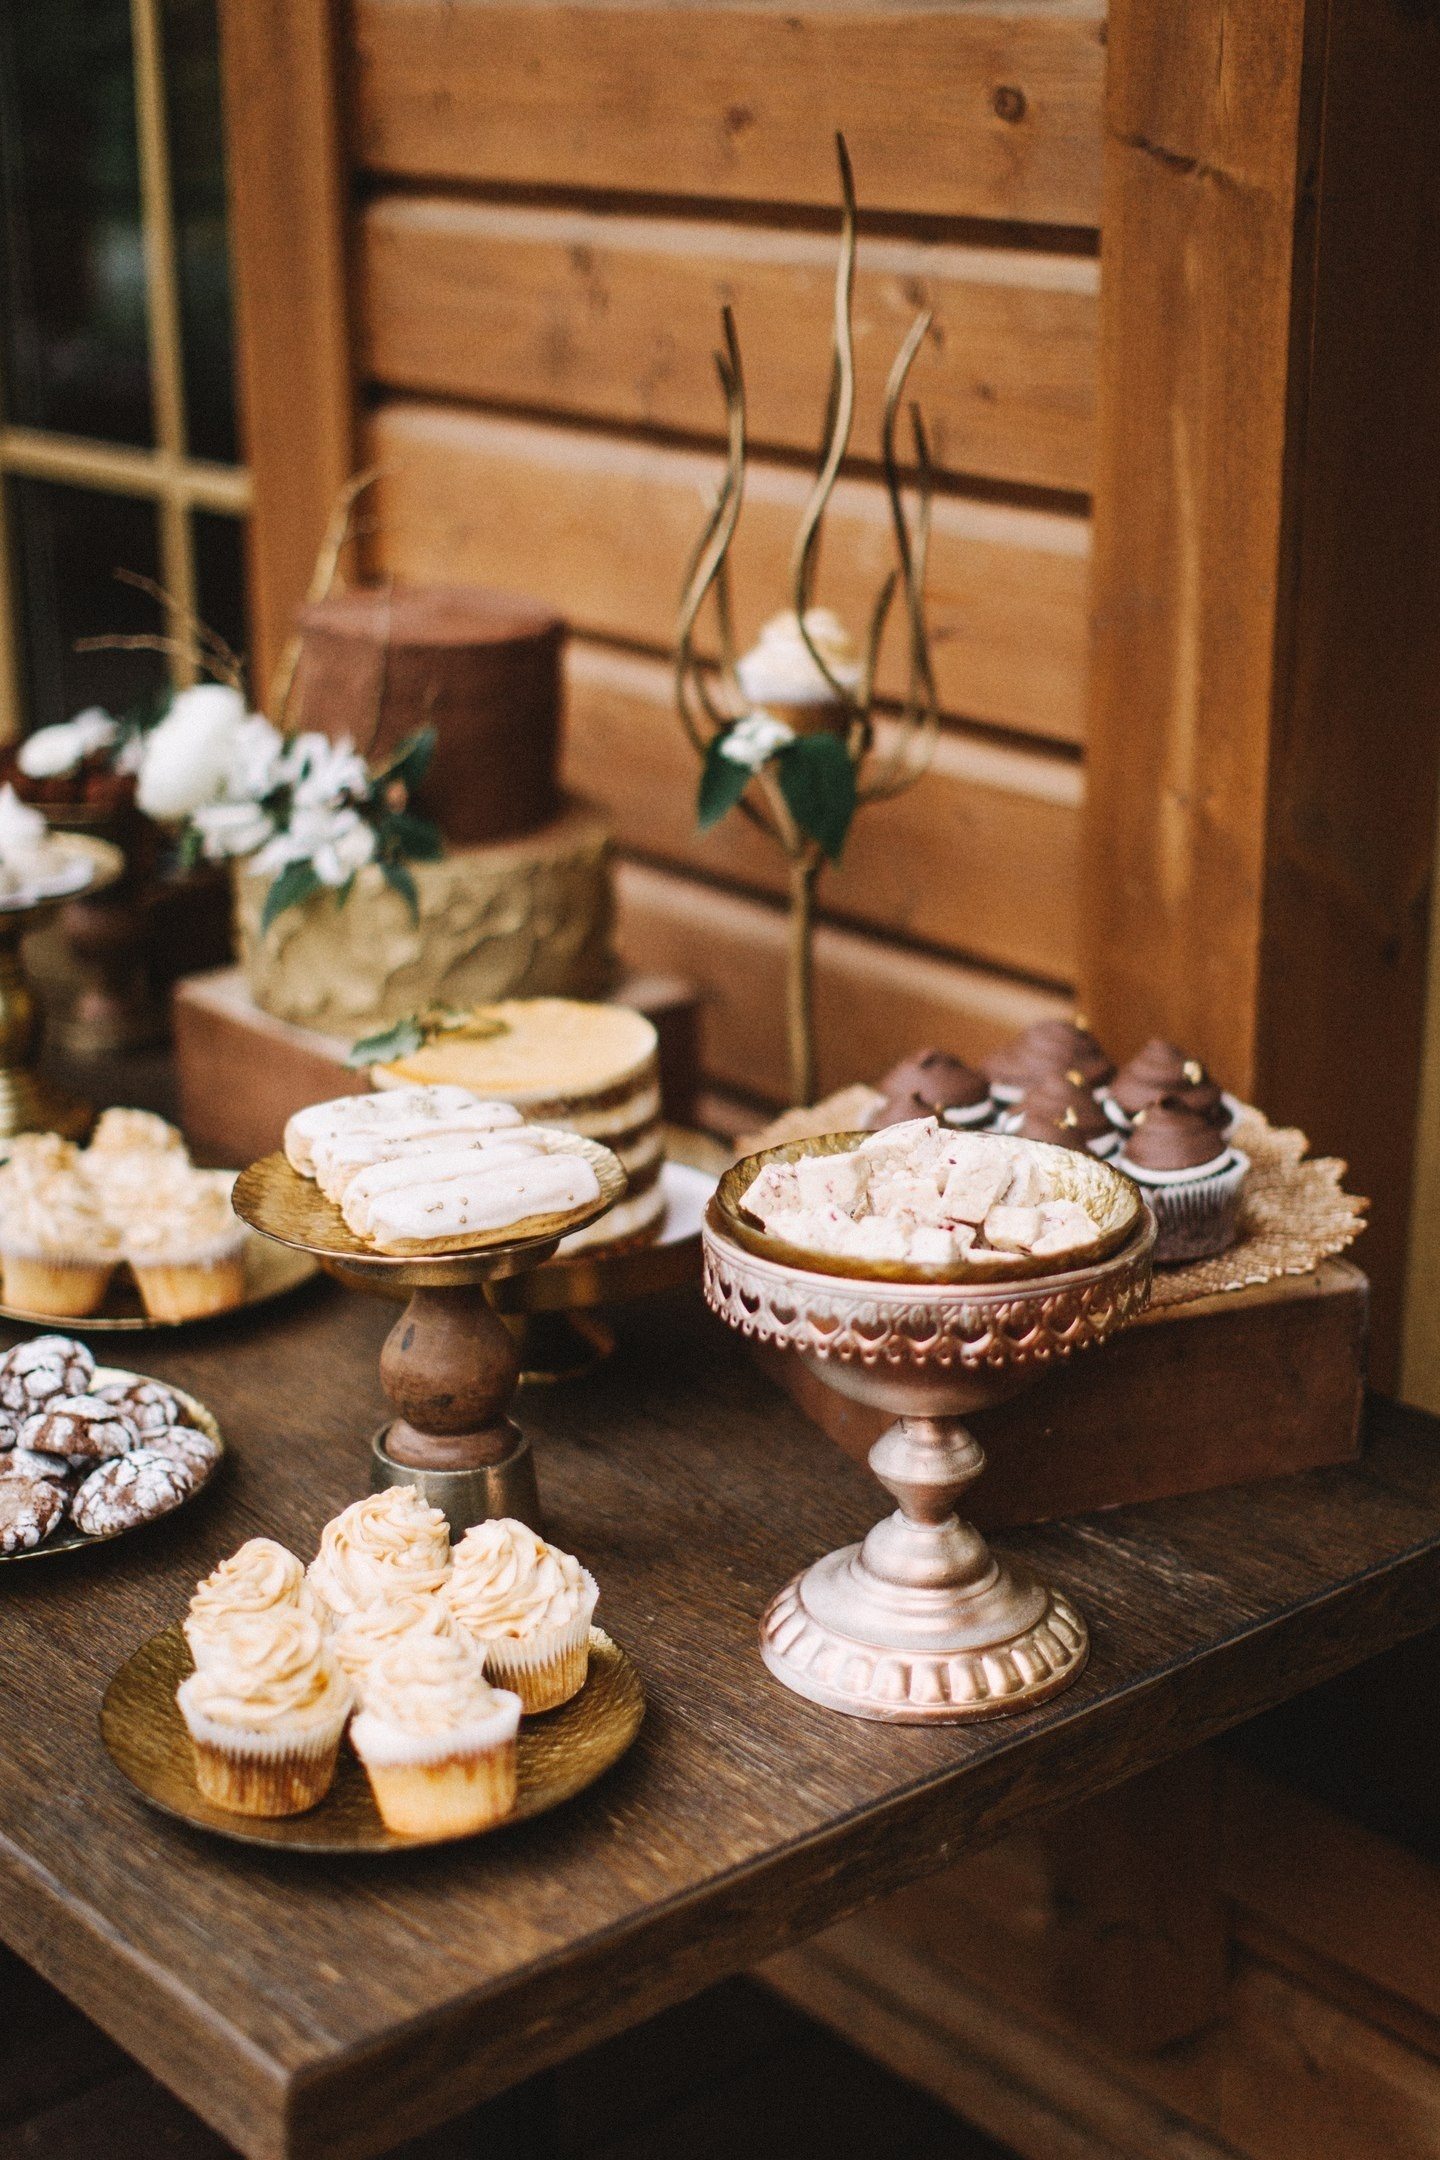 Broken bars of chocolate, truffles, mocha airy desserts, decorated with coffee beans and openwork cookies with icing in a wedding style look great in the company of aged boxes and ornate stands